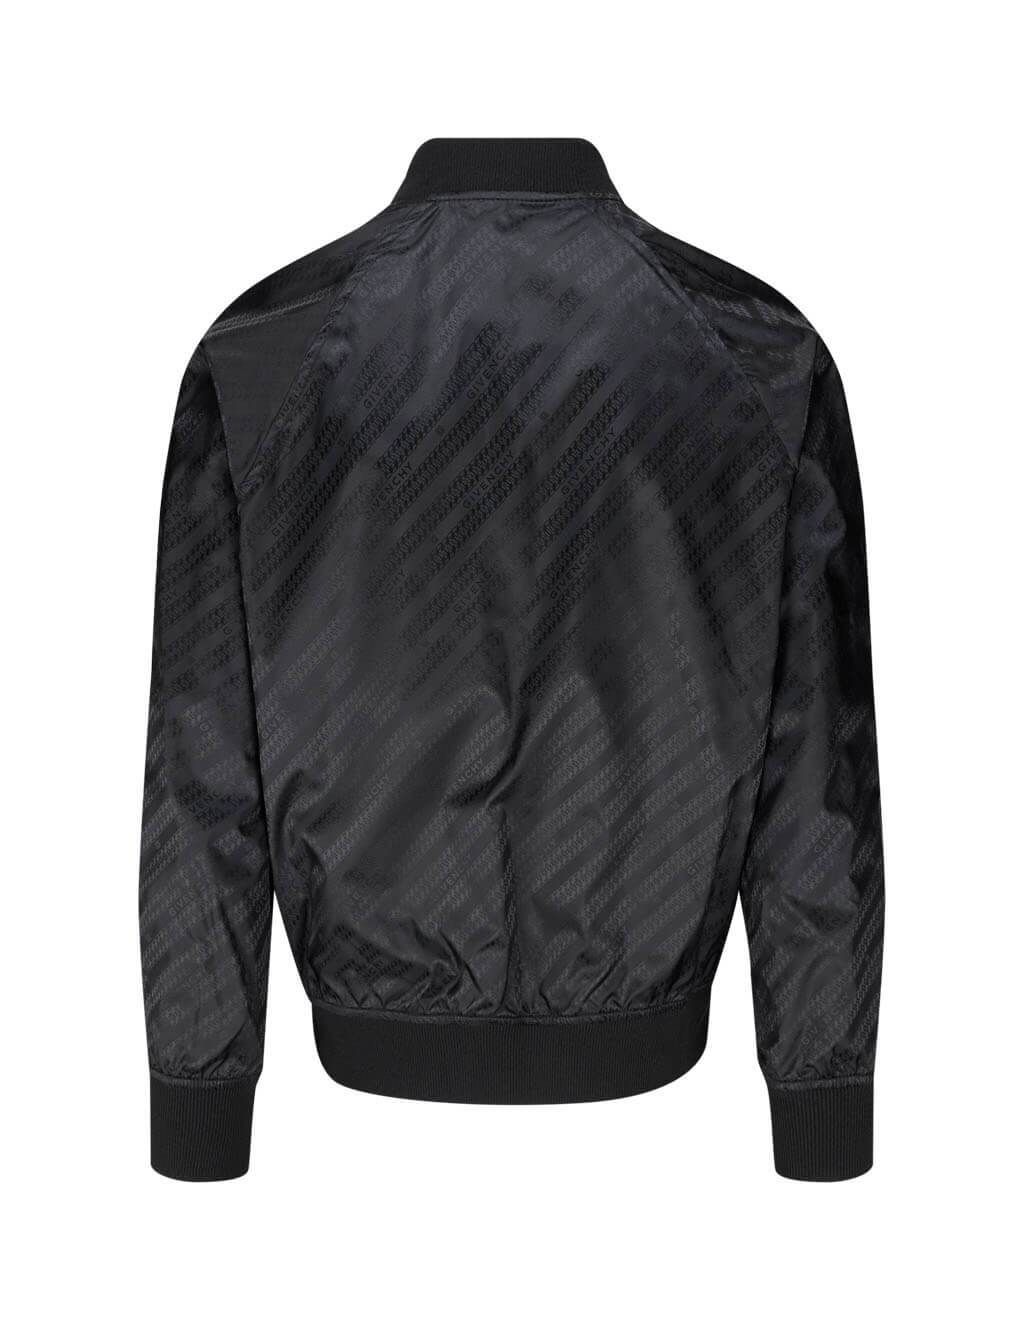 D I O R Oblique reversible bomber jacket Black Mens Fashion Coats  Jackets and Outerwear on Carousell